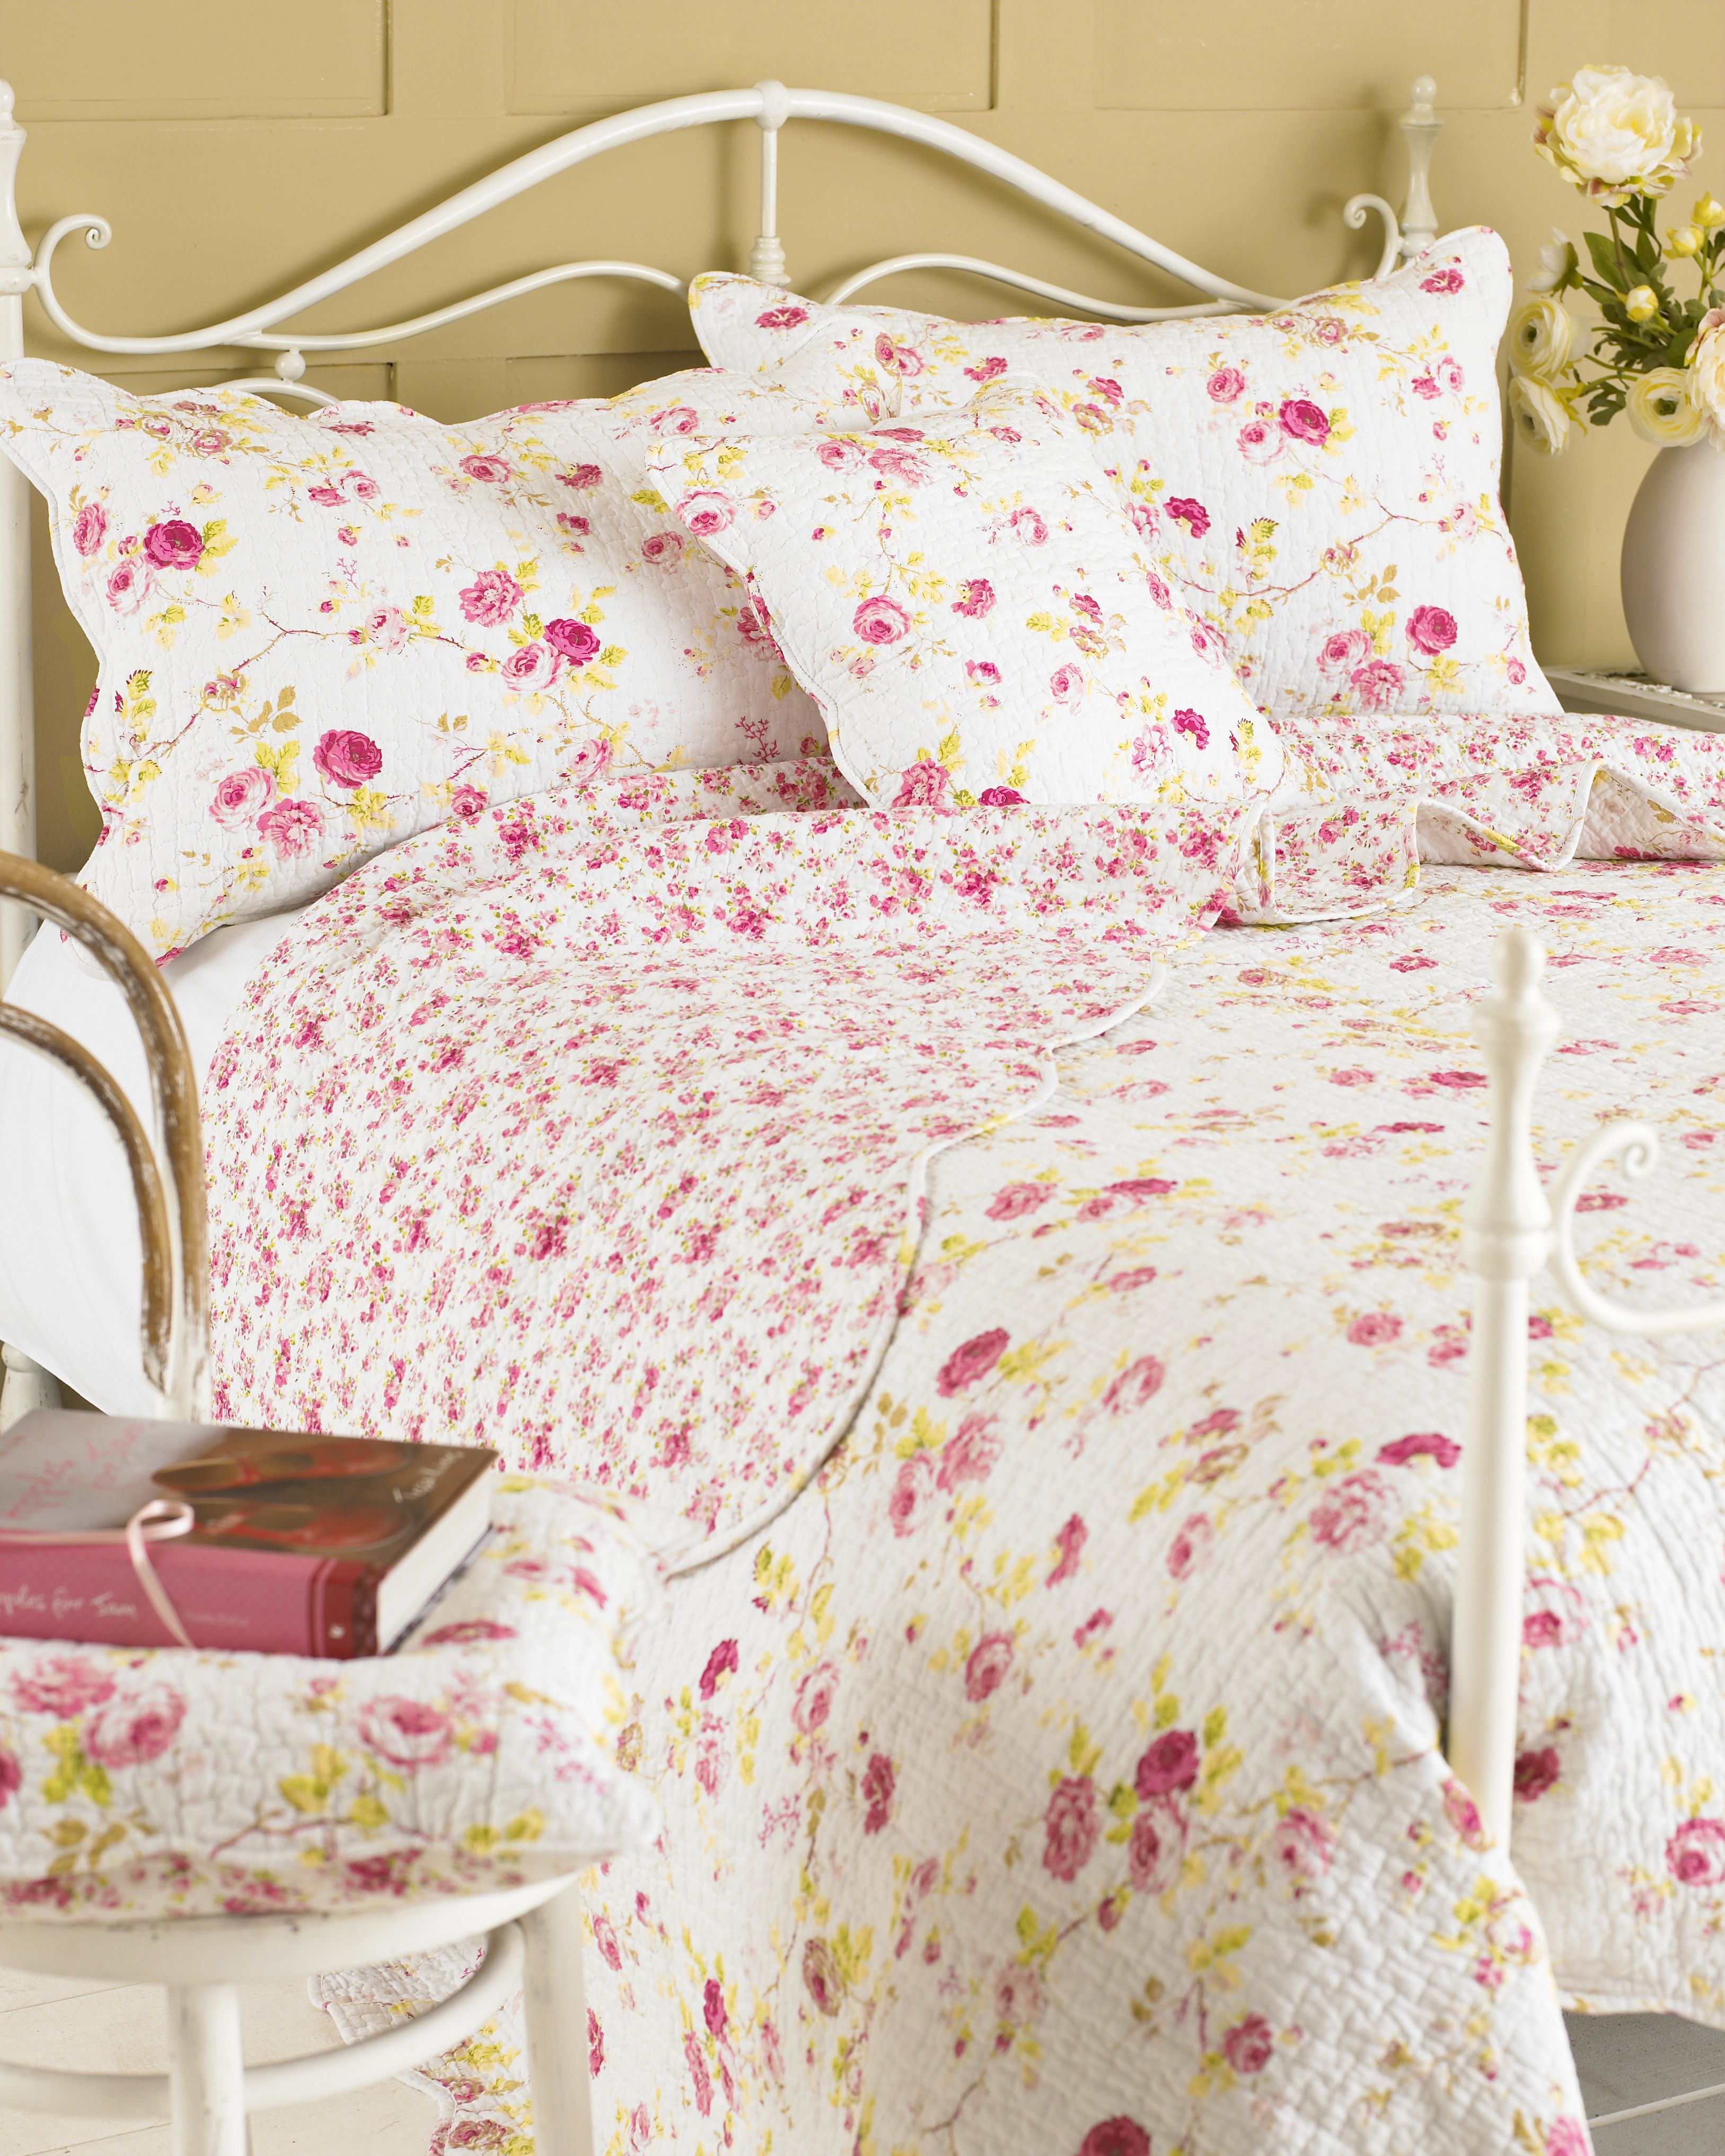 Floral and contemporary, this pillowcase sham will be the perfect addition to any home.